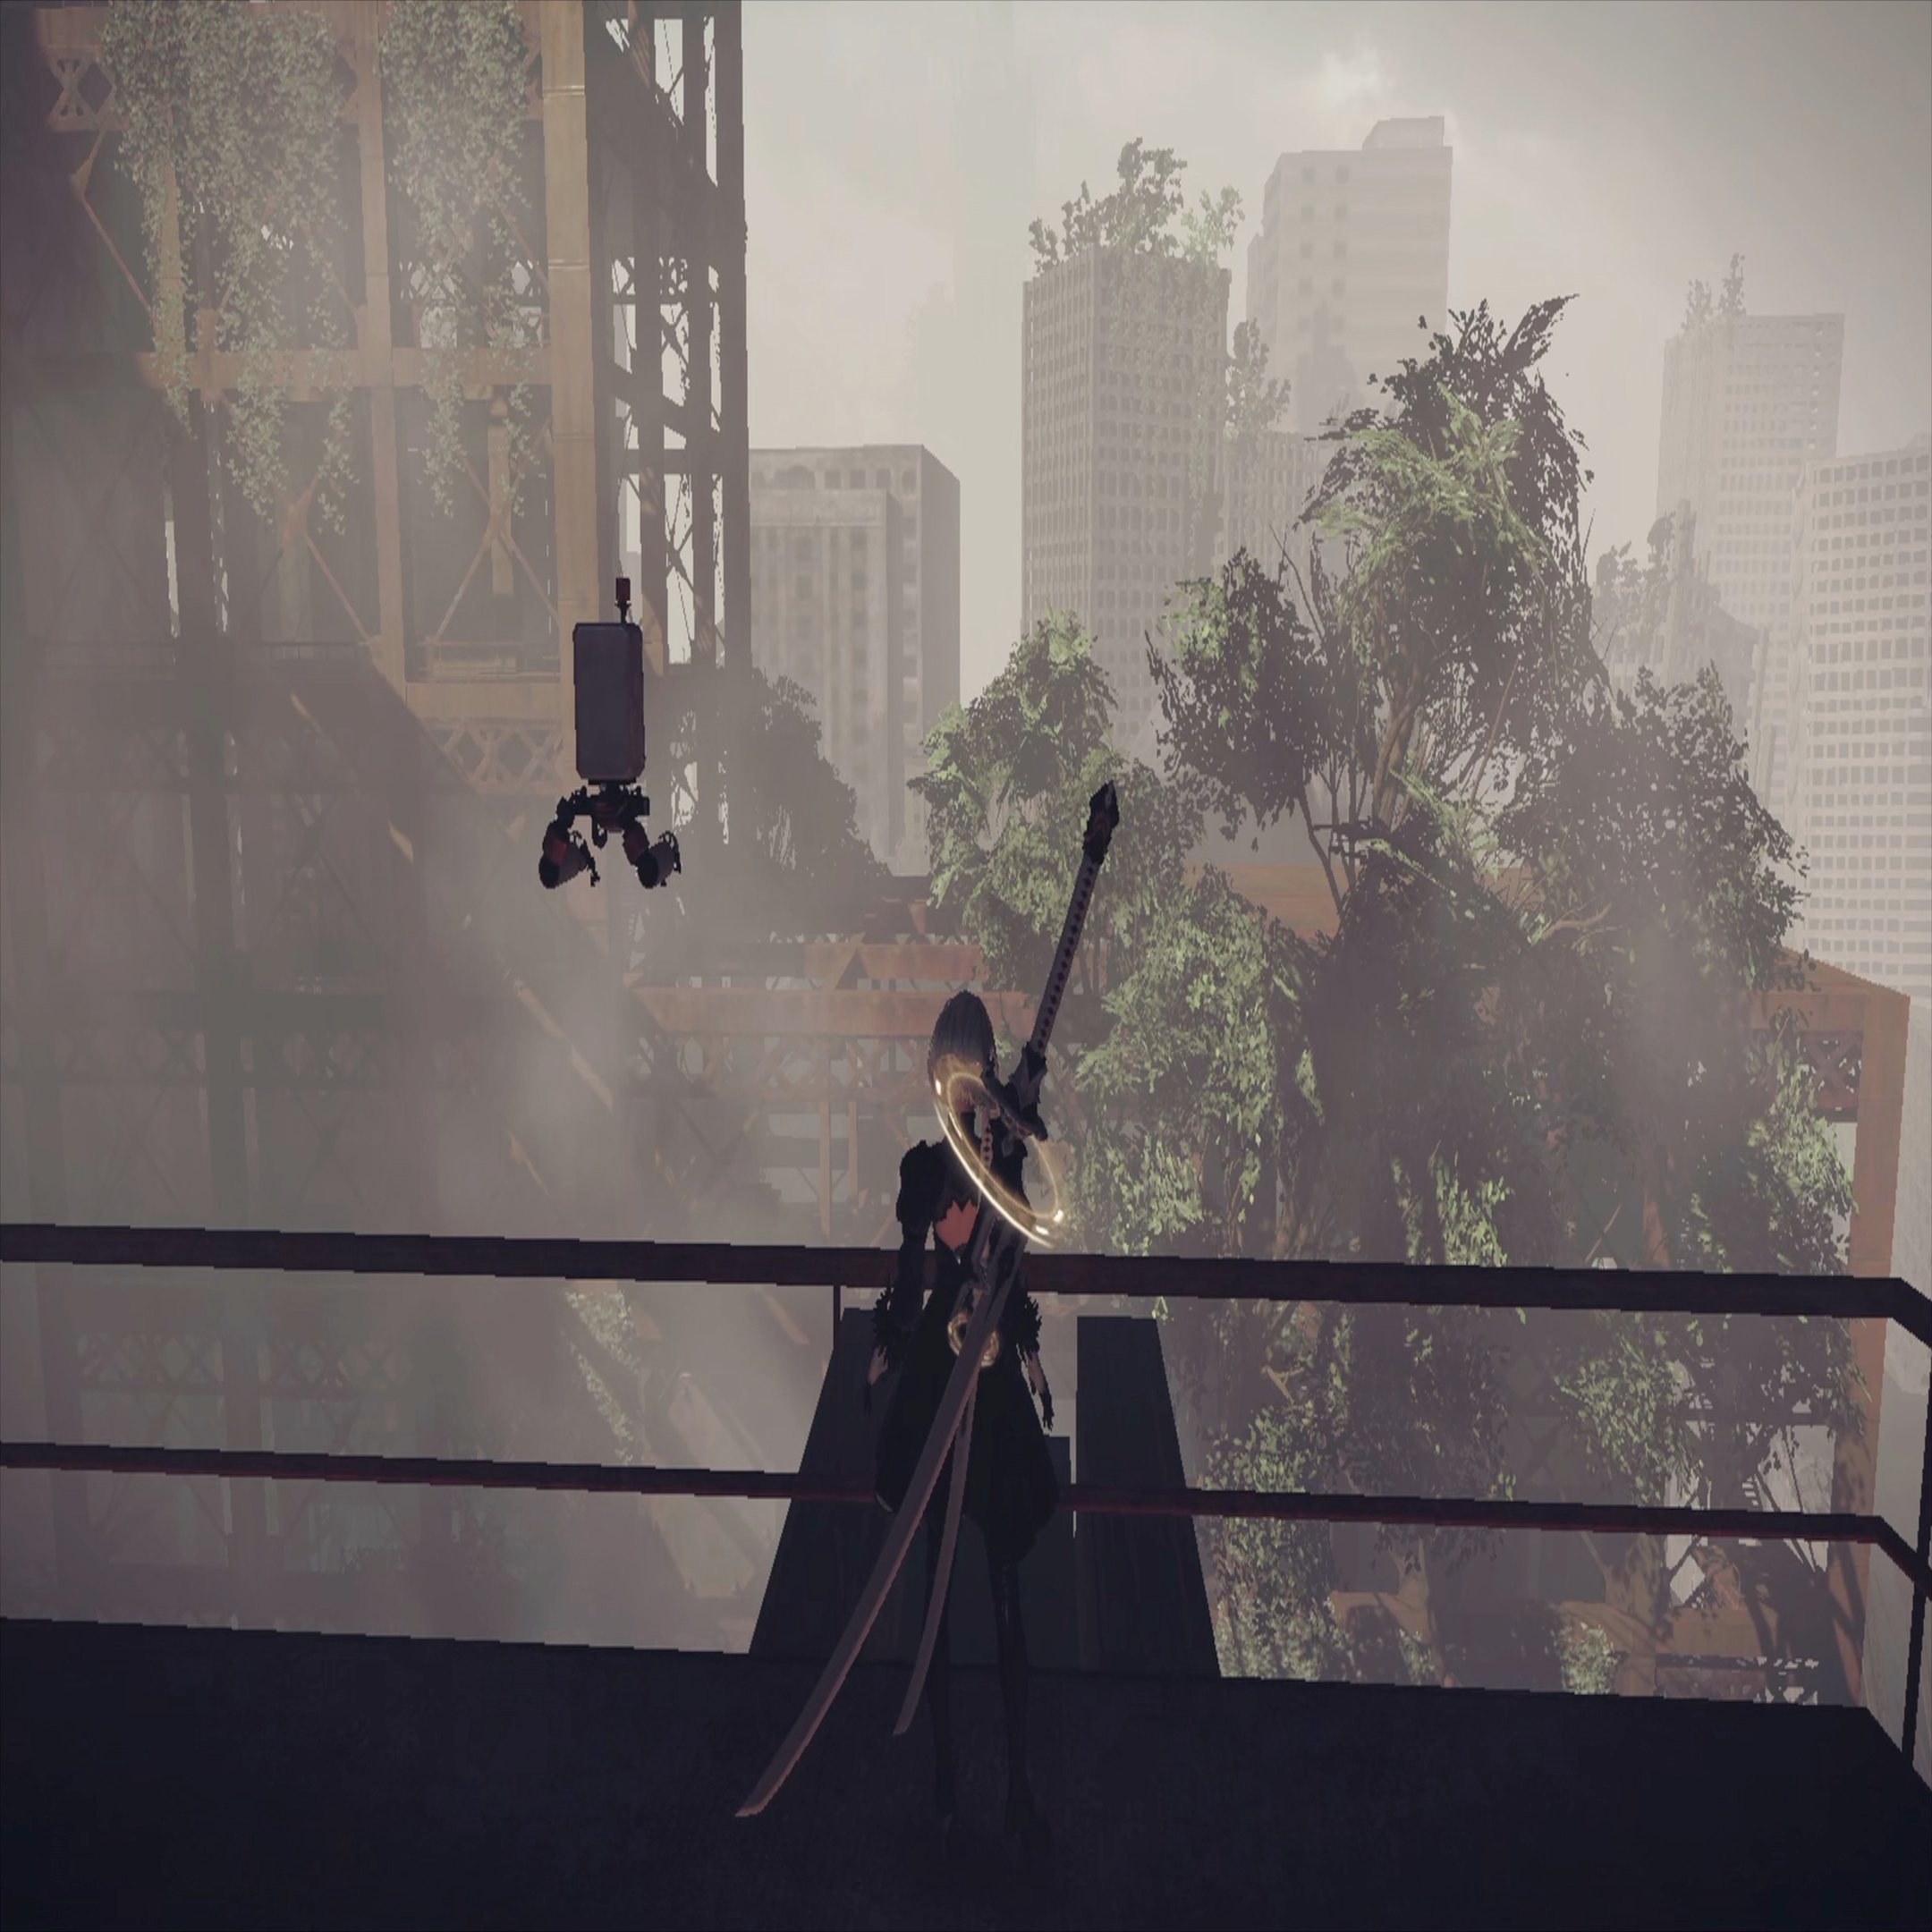 NieR Automata Switch Port Will Appear in October - Siliconera